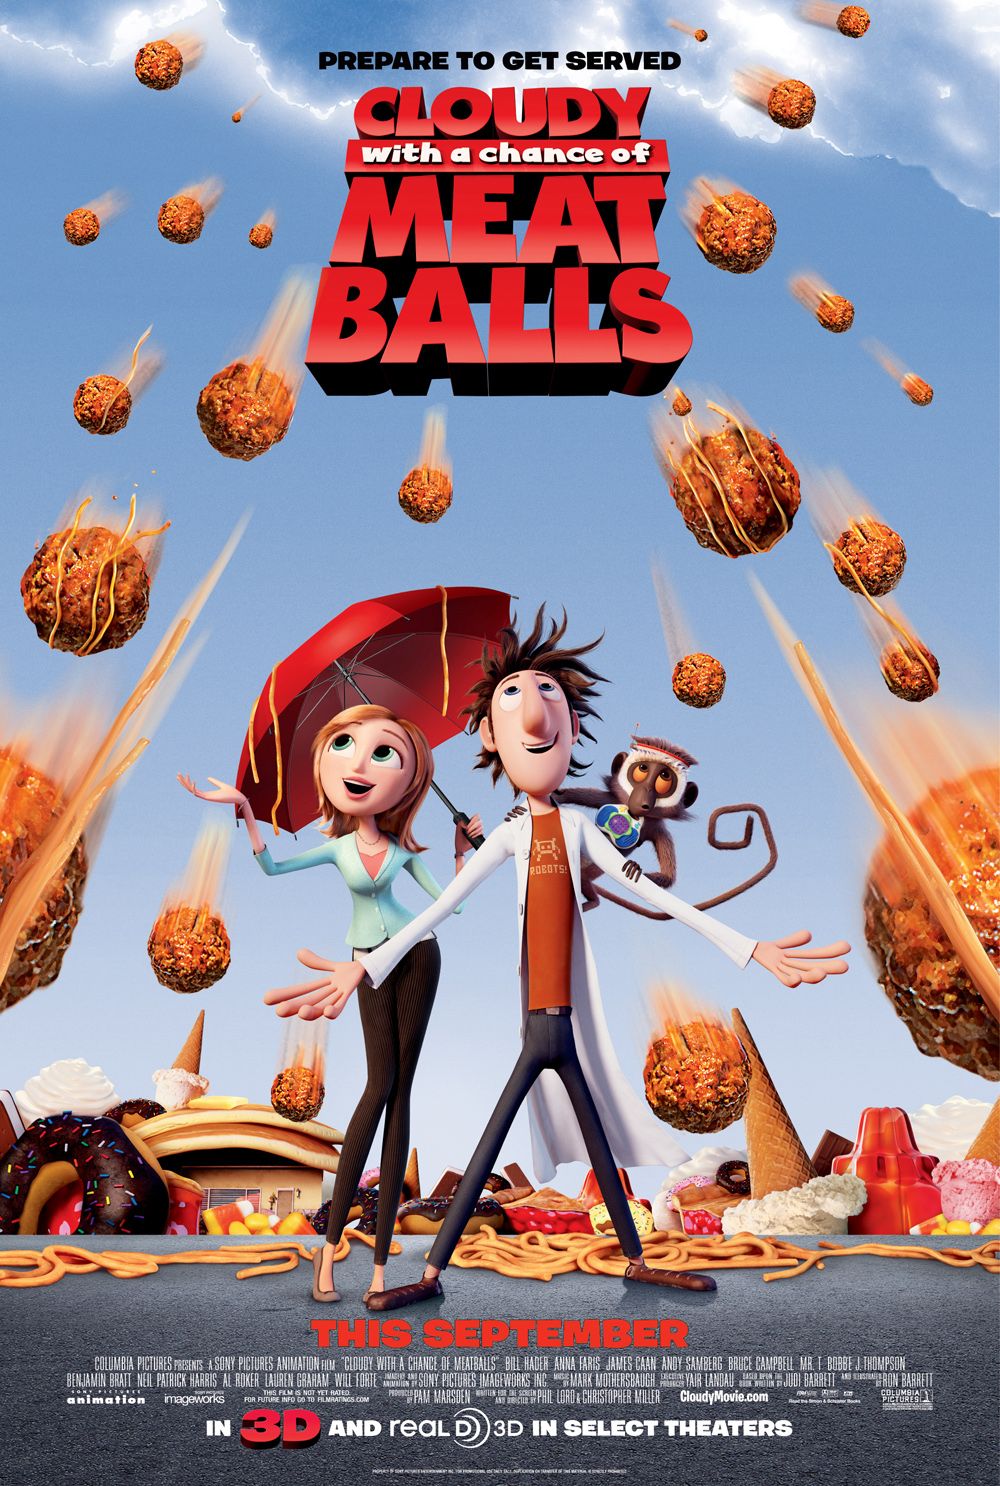 [cloudy_with_a_chance_of_meatballs_ver3_xlg.jpg]